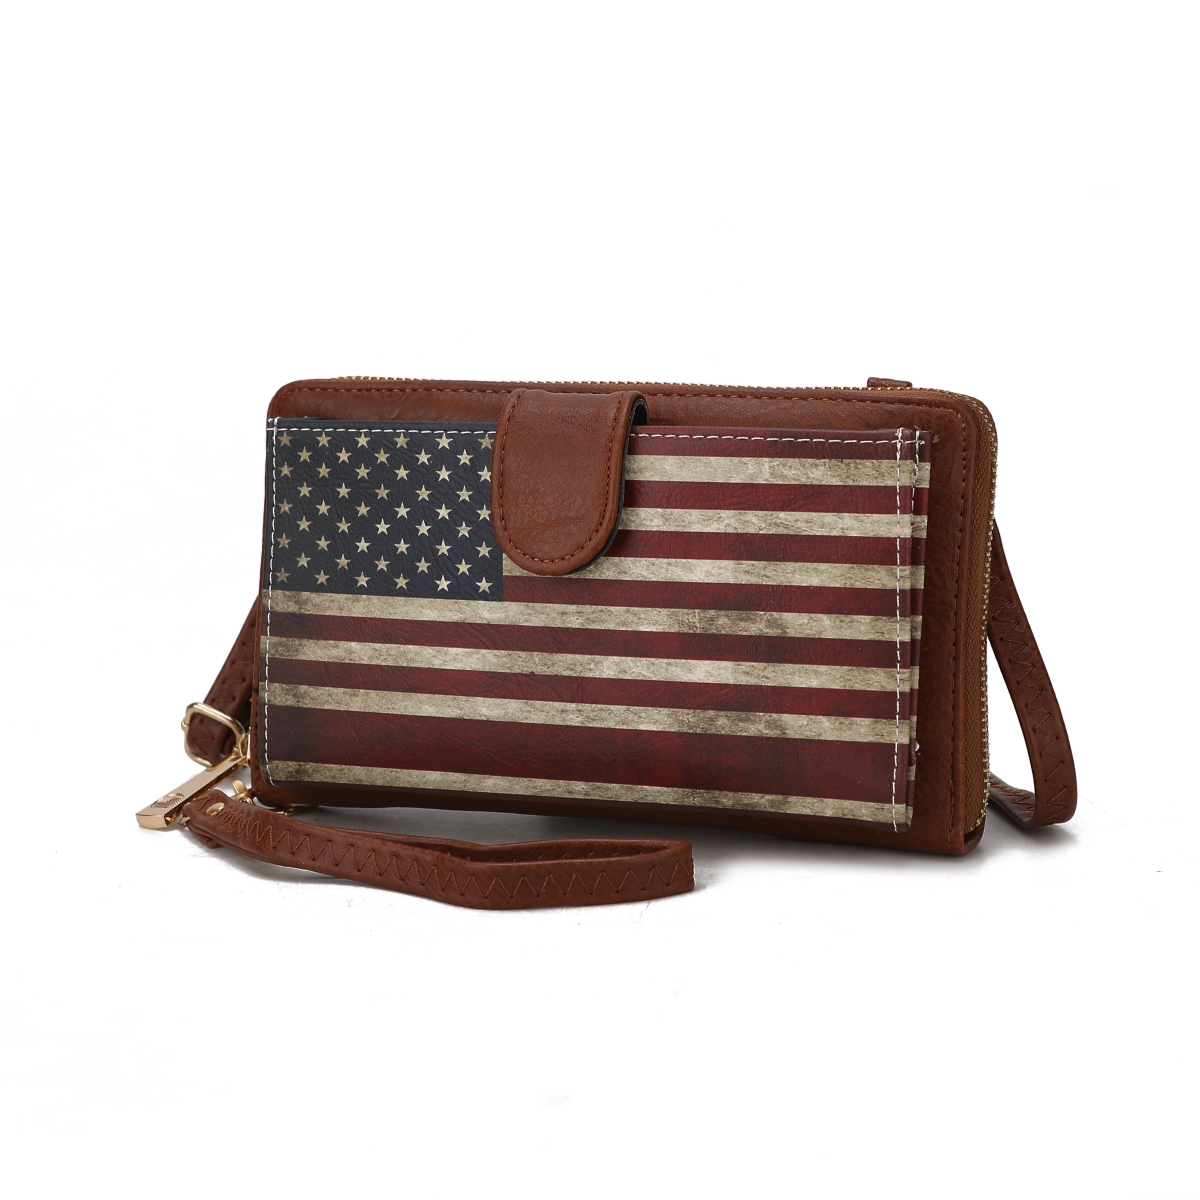 Picture of MKF Collection by Mia K. MKF-FG7406TN Kiara Smartphone and Wallet Convertible FLAG Crossbody Bag